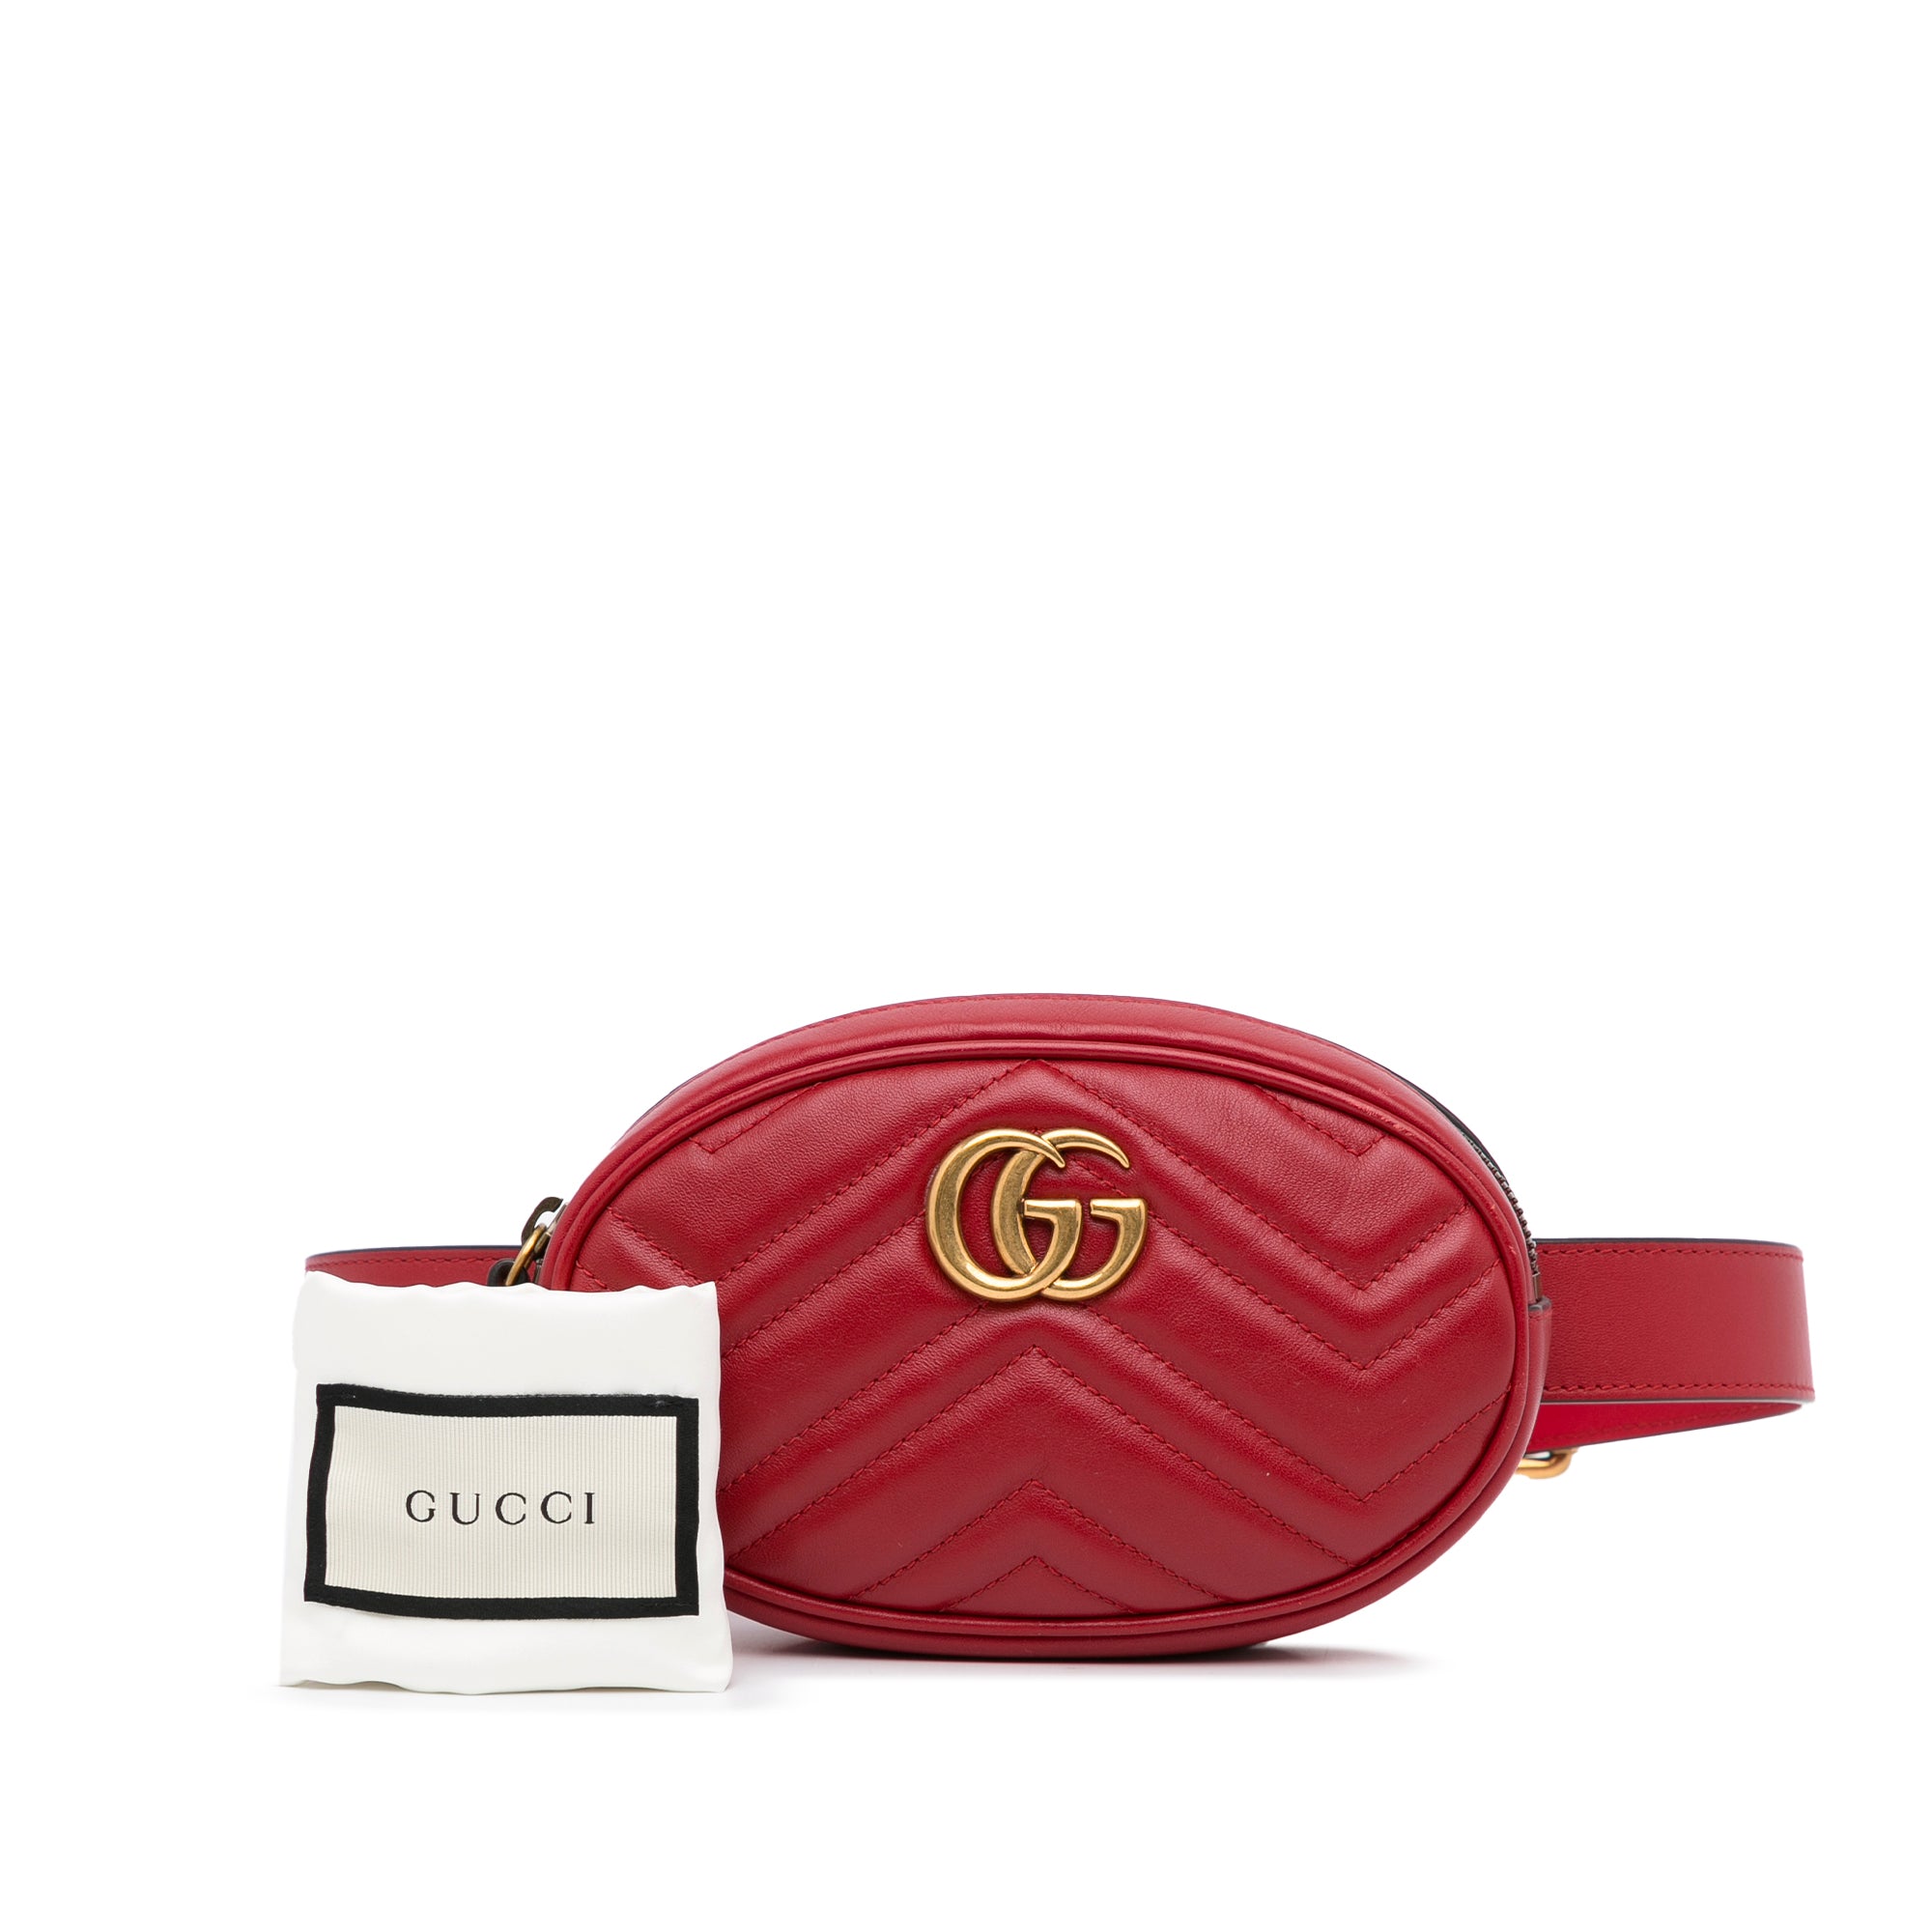 Authenticated Used Gucci Waist Pouch Body Bag GUCCI Backpack Belt